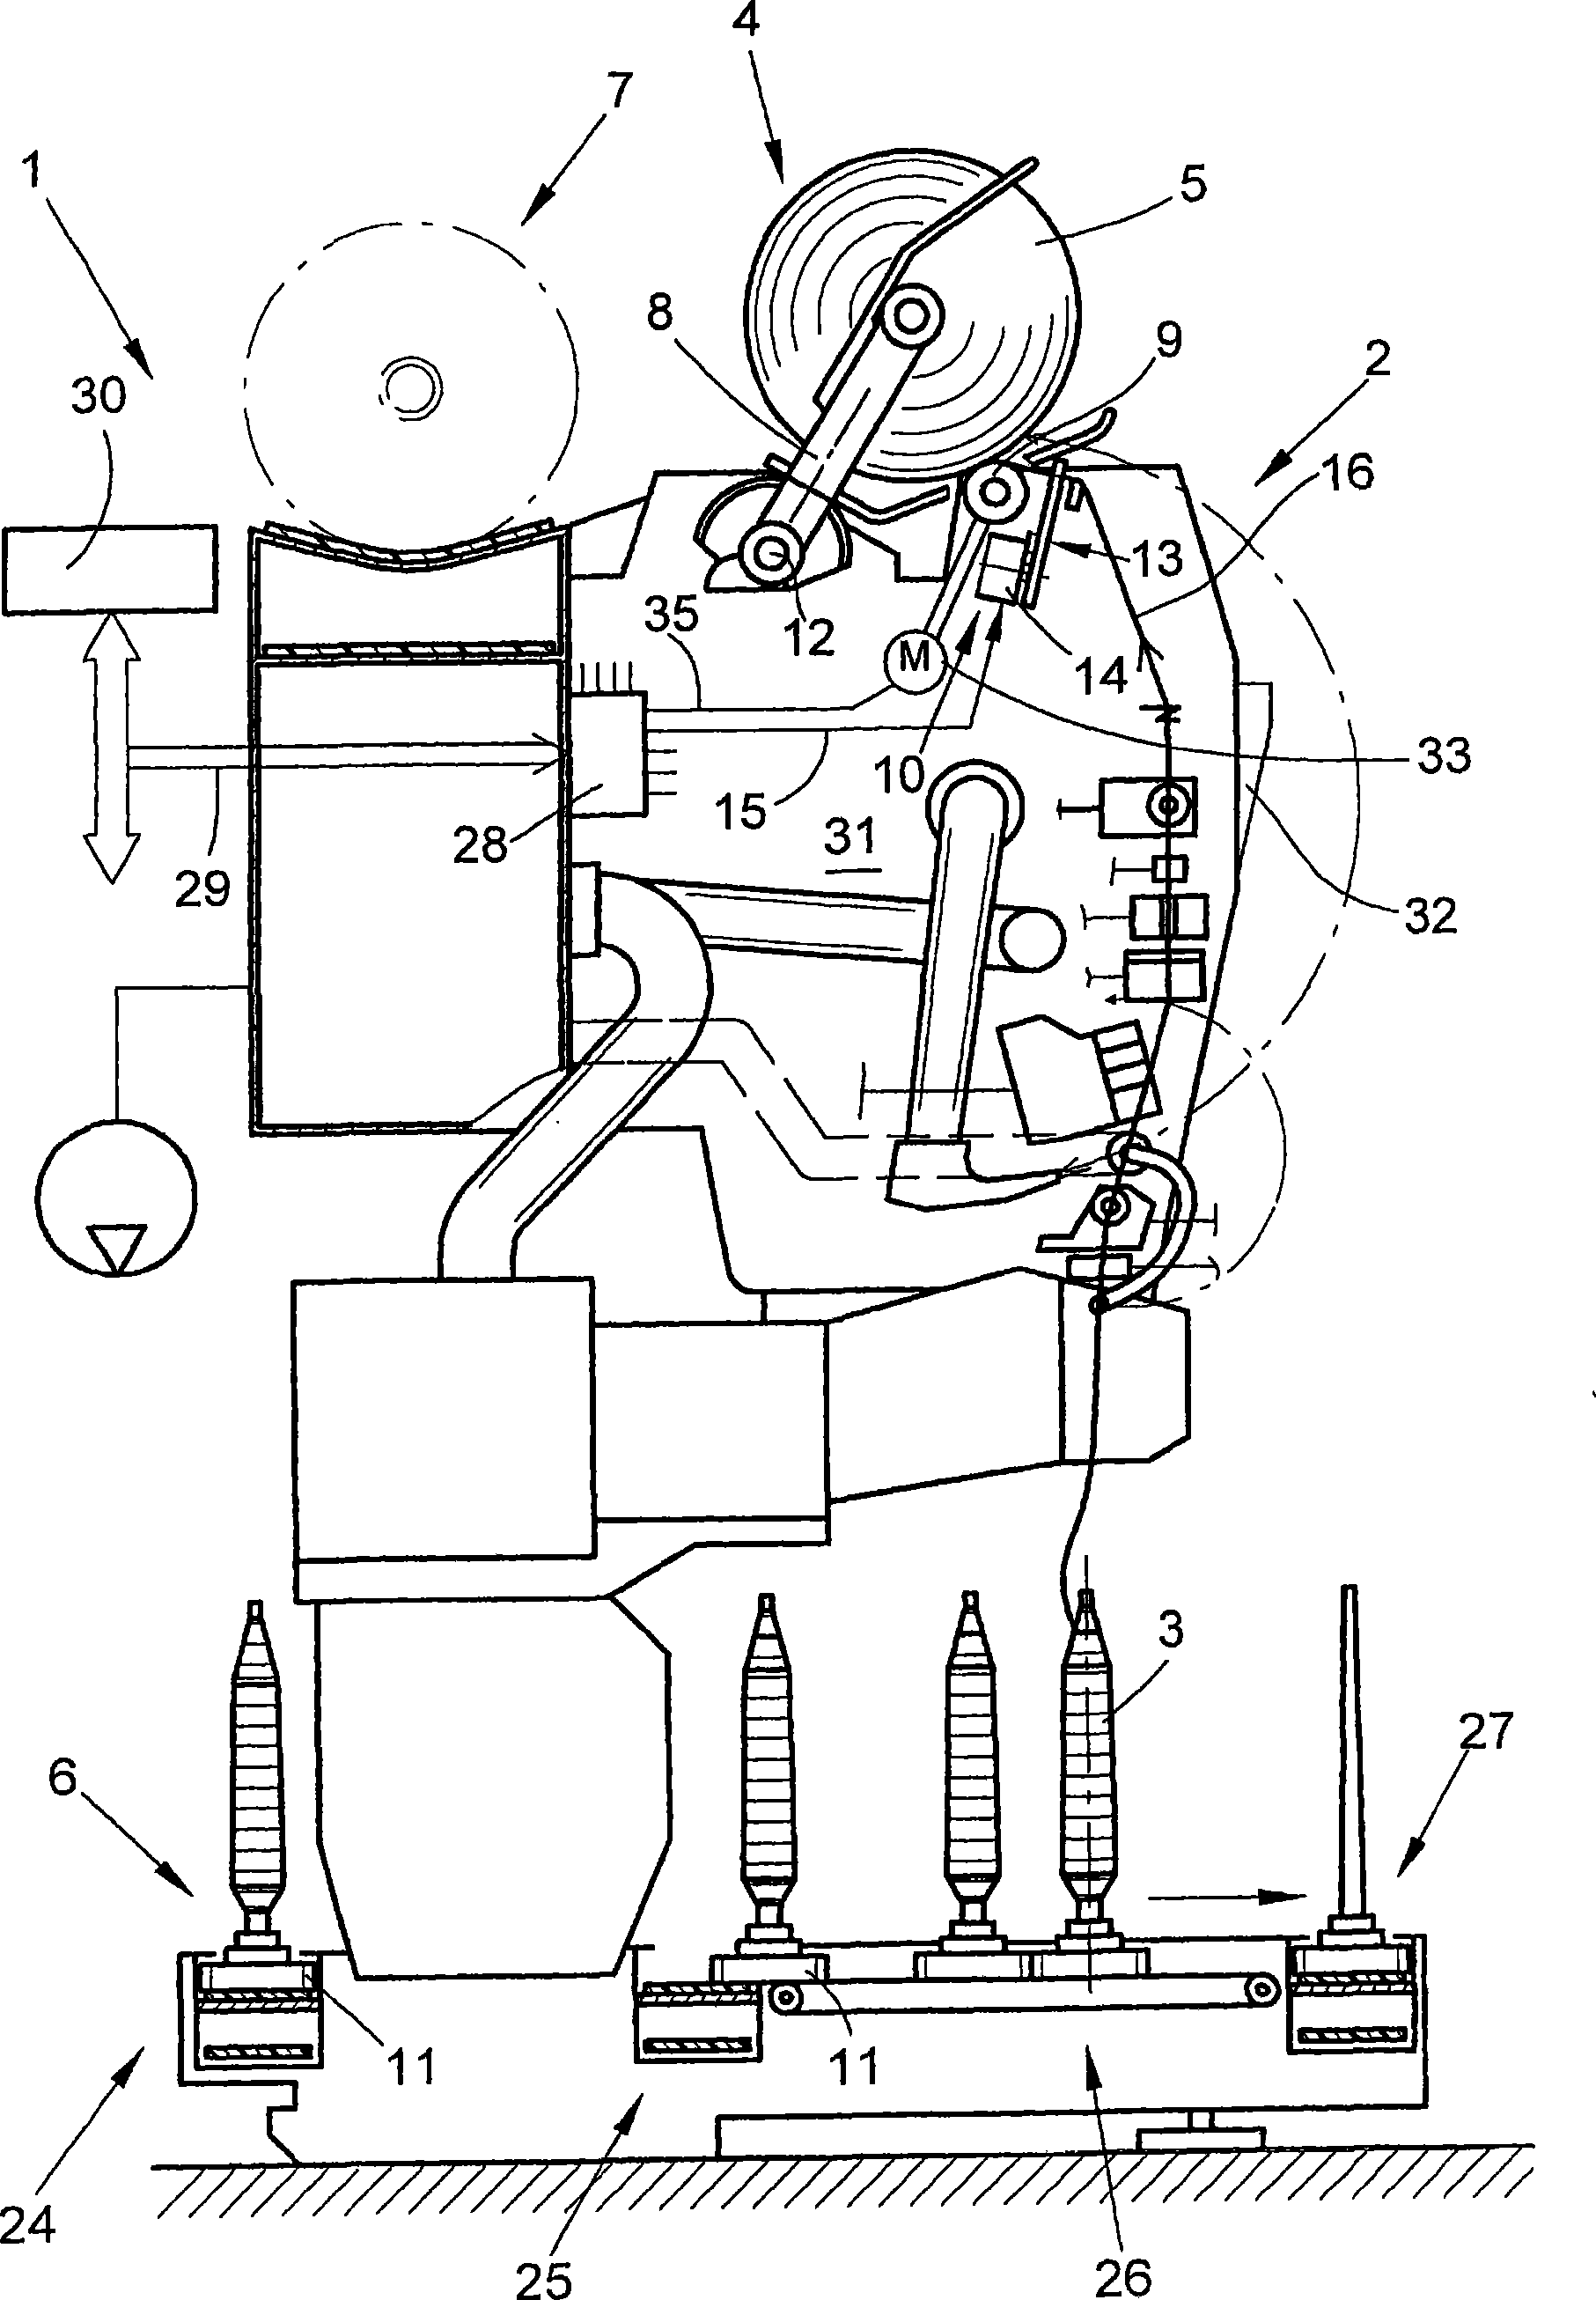 Method for winding yarn on bobbin to form intersected coiled bobbin